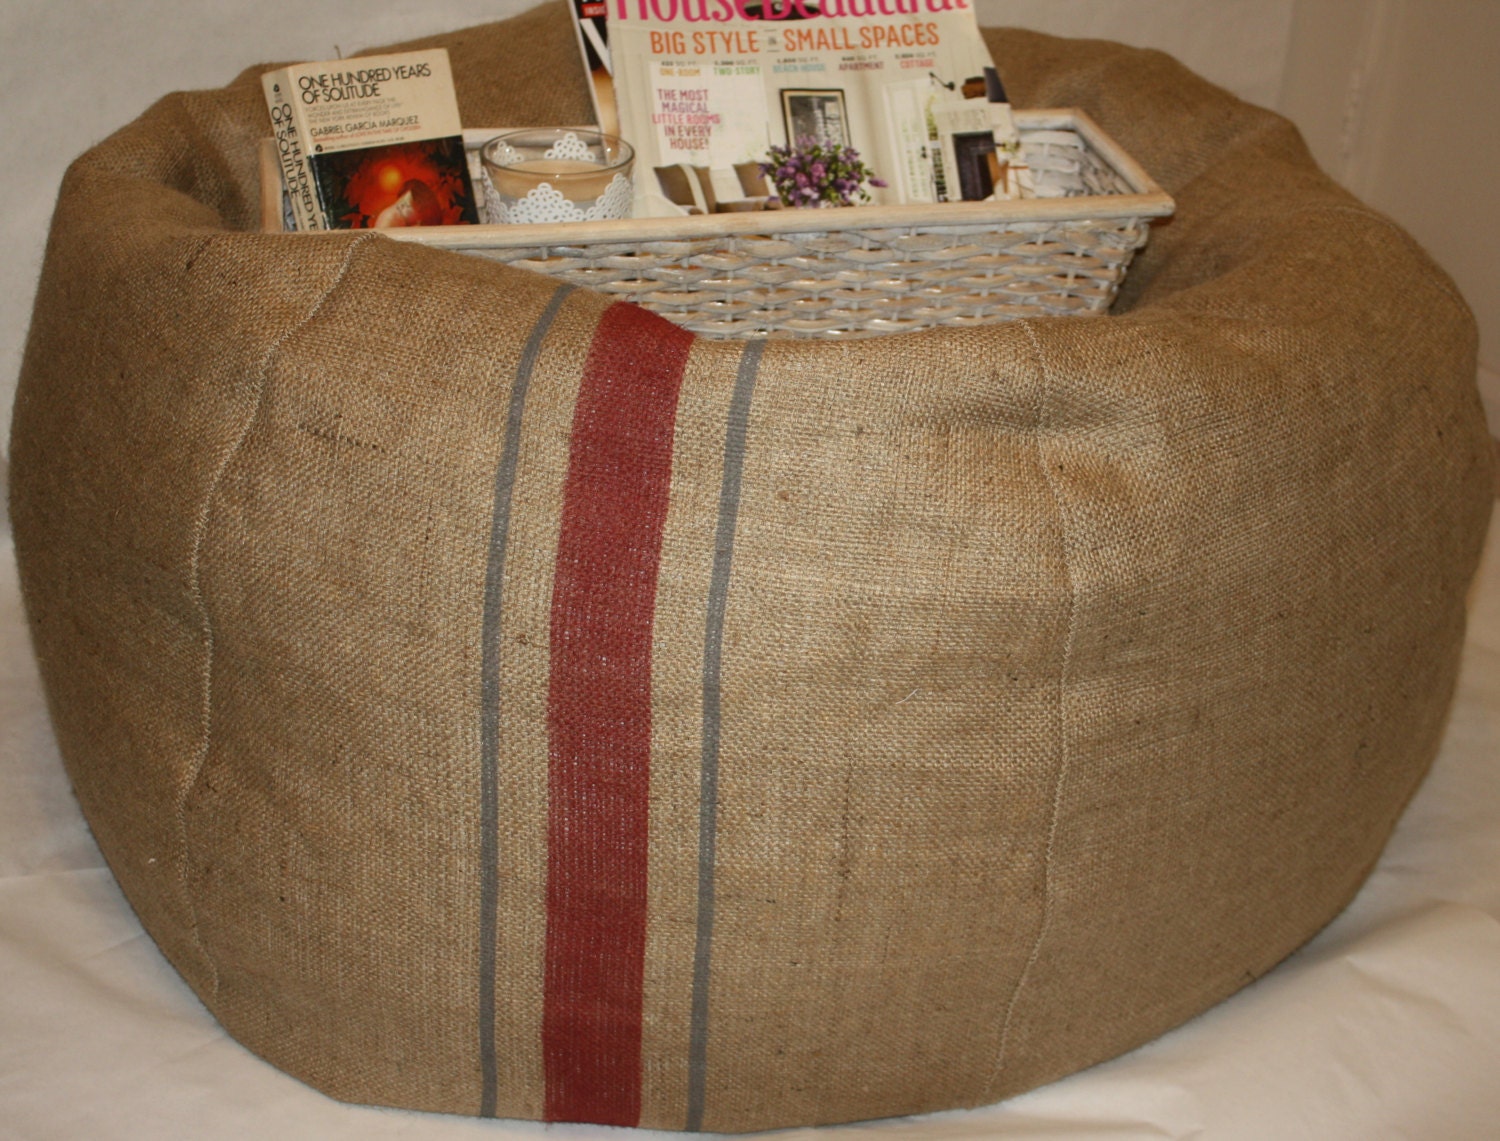 23" Diameter - Rustic Burlap Stripe Beanbag with Filling, Home Decor, Furniture, Pouf  -   Great for outdoor or indoor - JiaHomeCollection